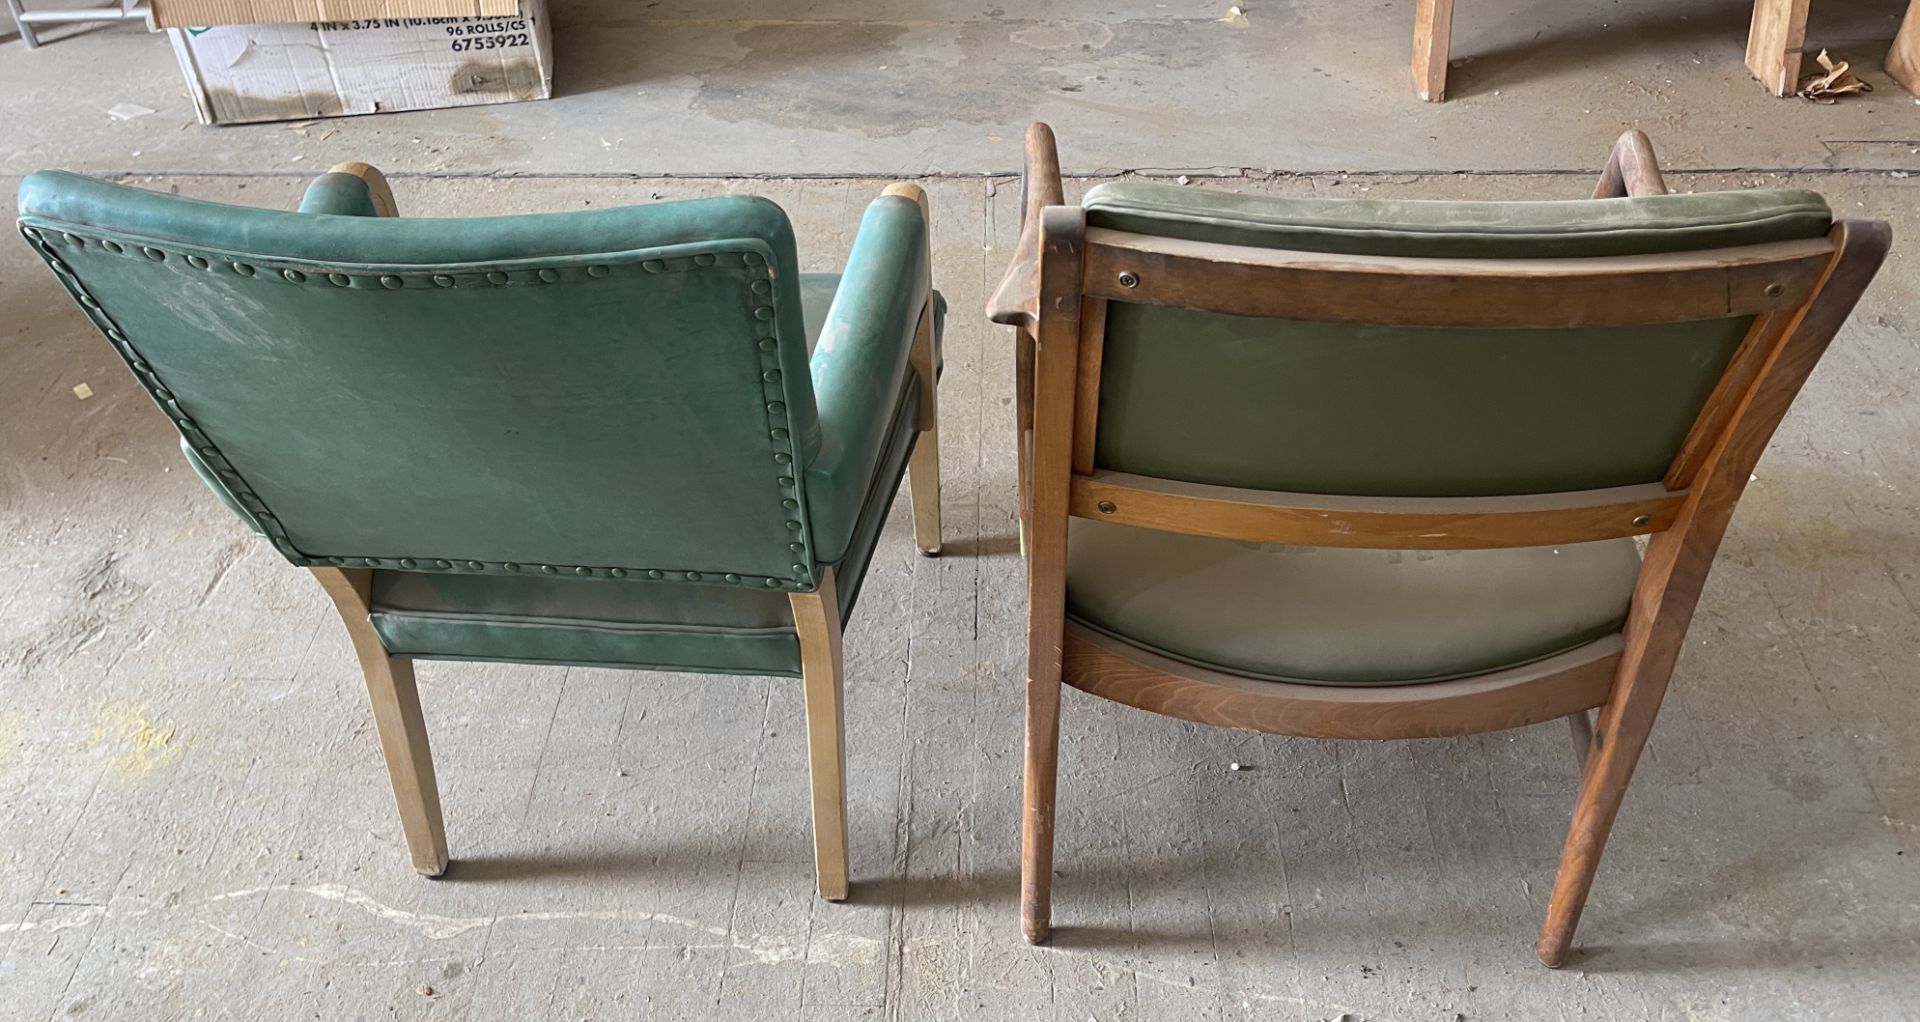 VINTAGE ART DECO CHAIRS , HIGHLY SEARCHED BY COLLECTORS - Image 2 of 3